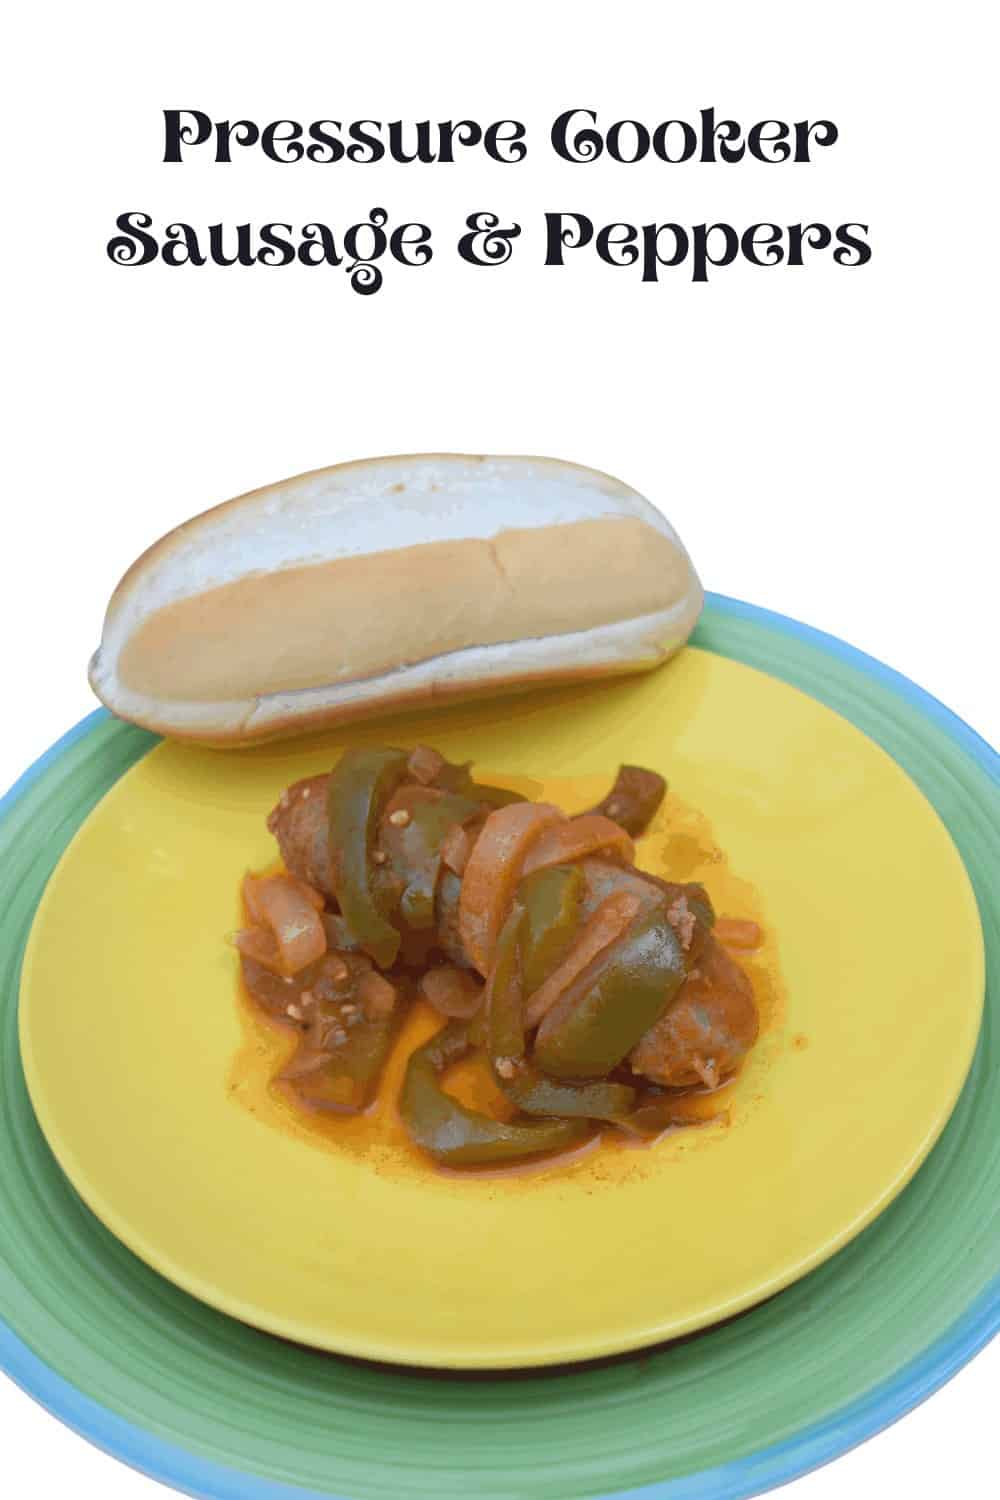 sausage and peppers from a pressure cooker 